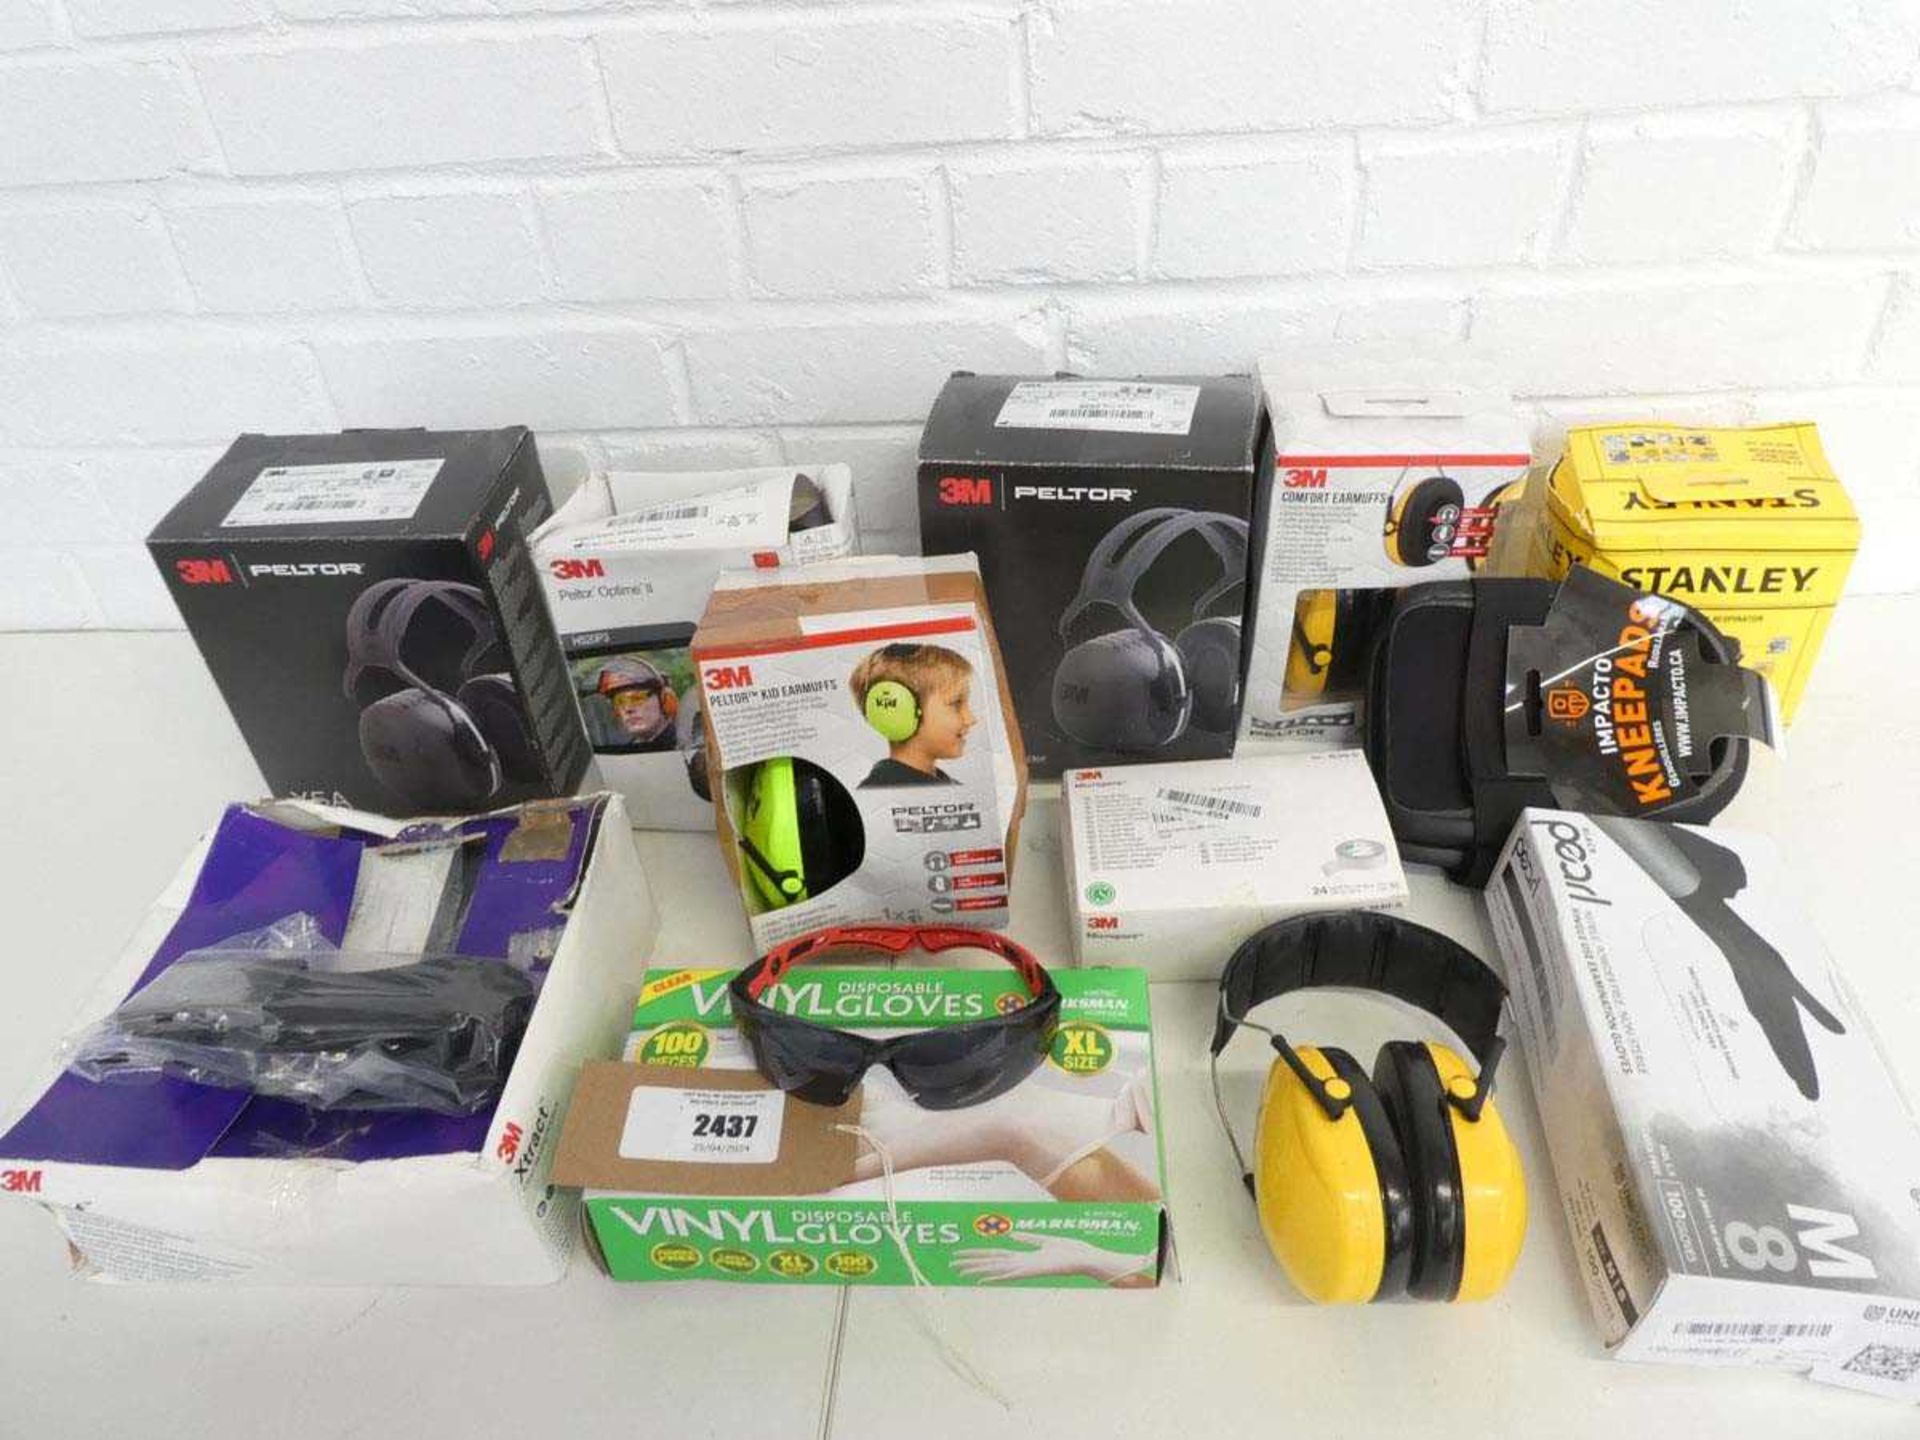 +VAT Quantity of mainly 3M branded work safety related items to include X5A Peltor hearing